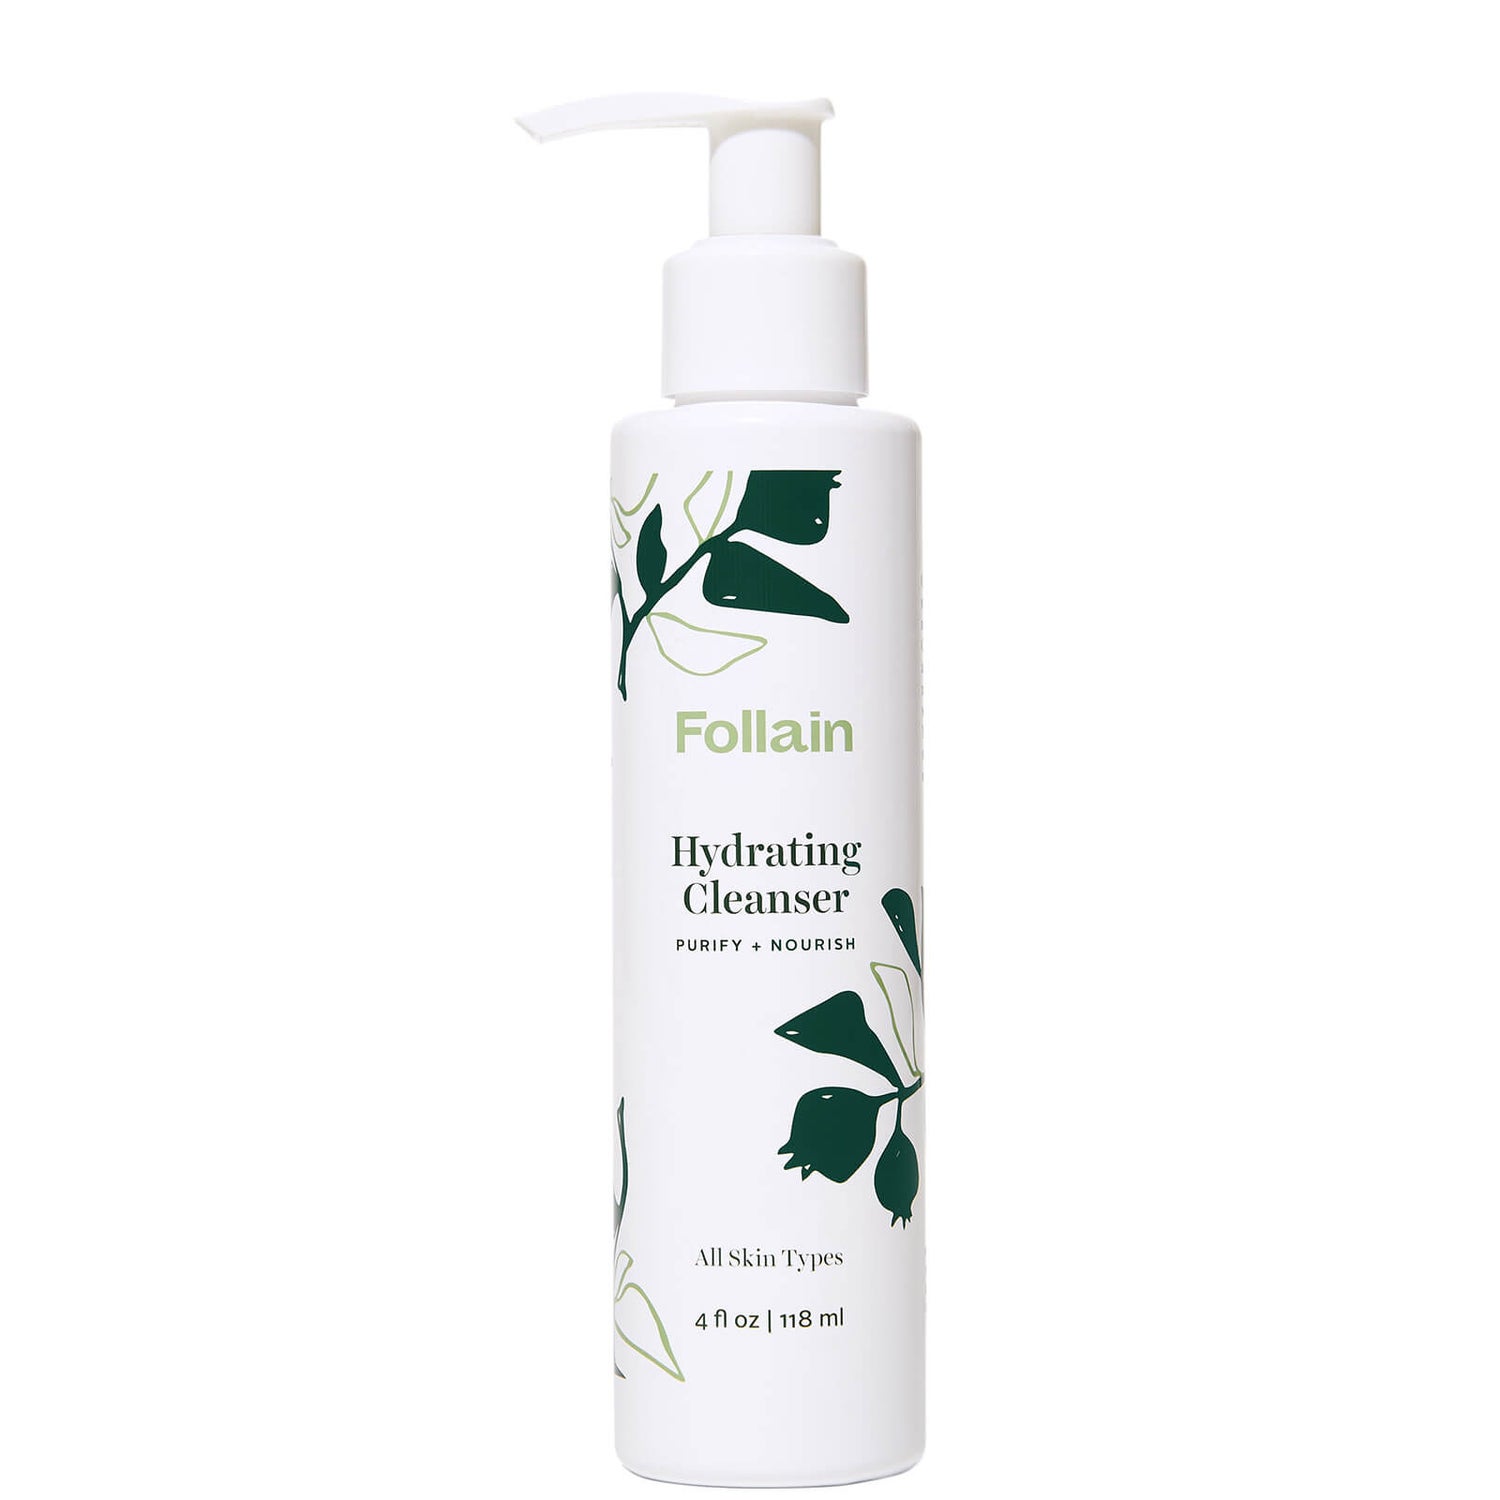 Follain Hydrating Cleanser Purify and Nourish 4 fl. oz